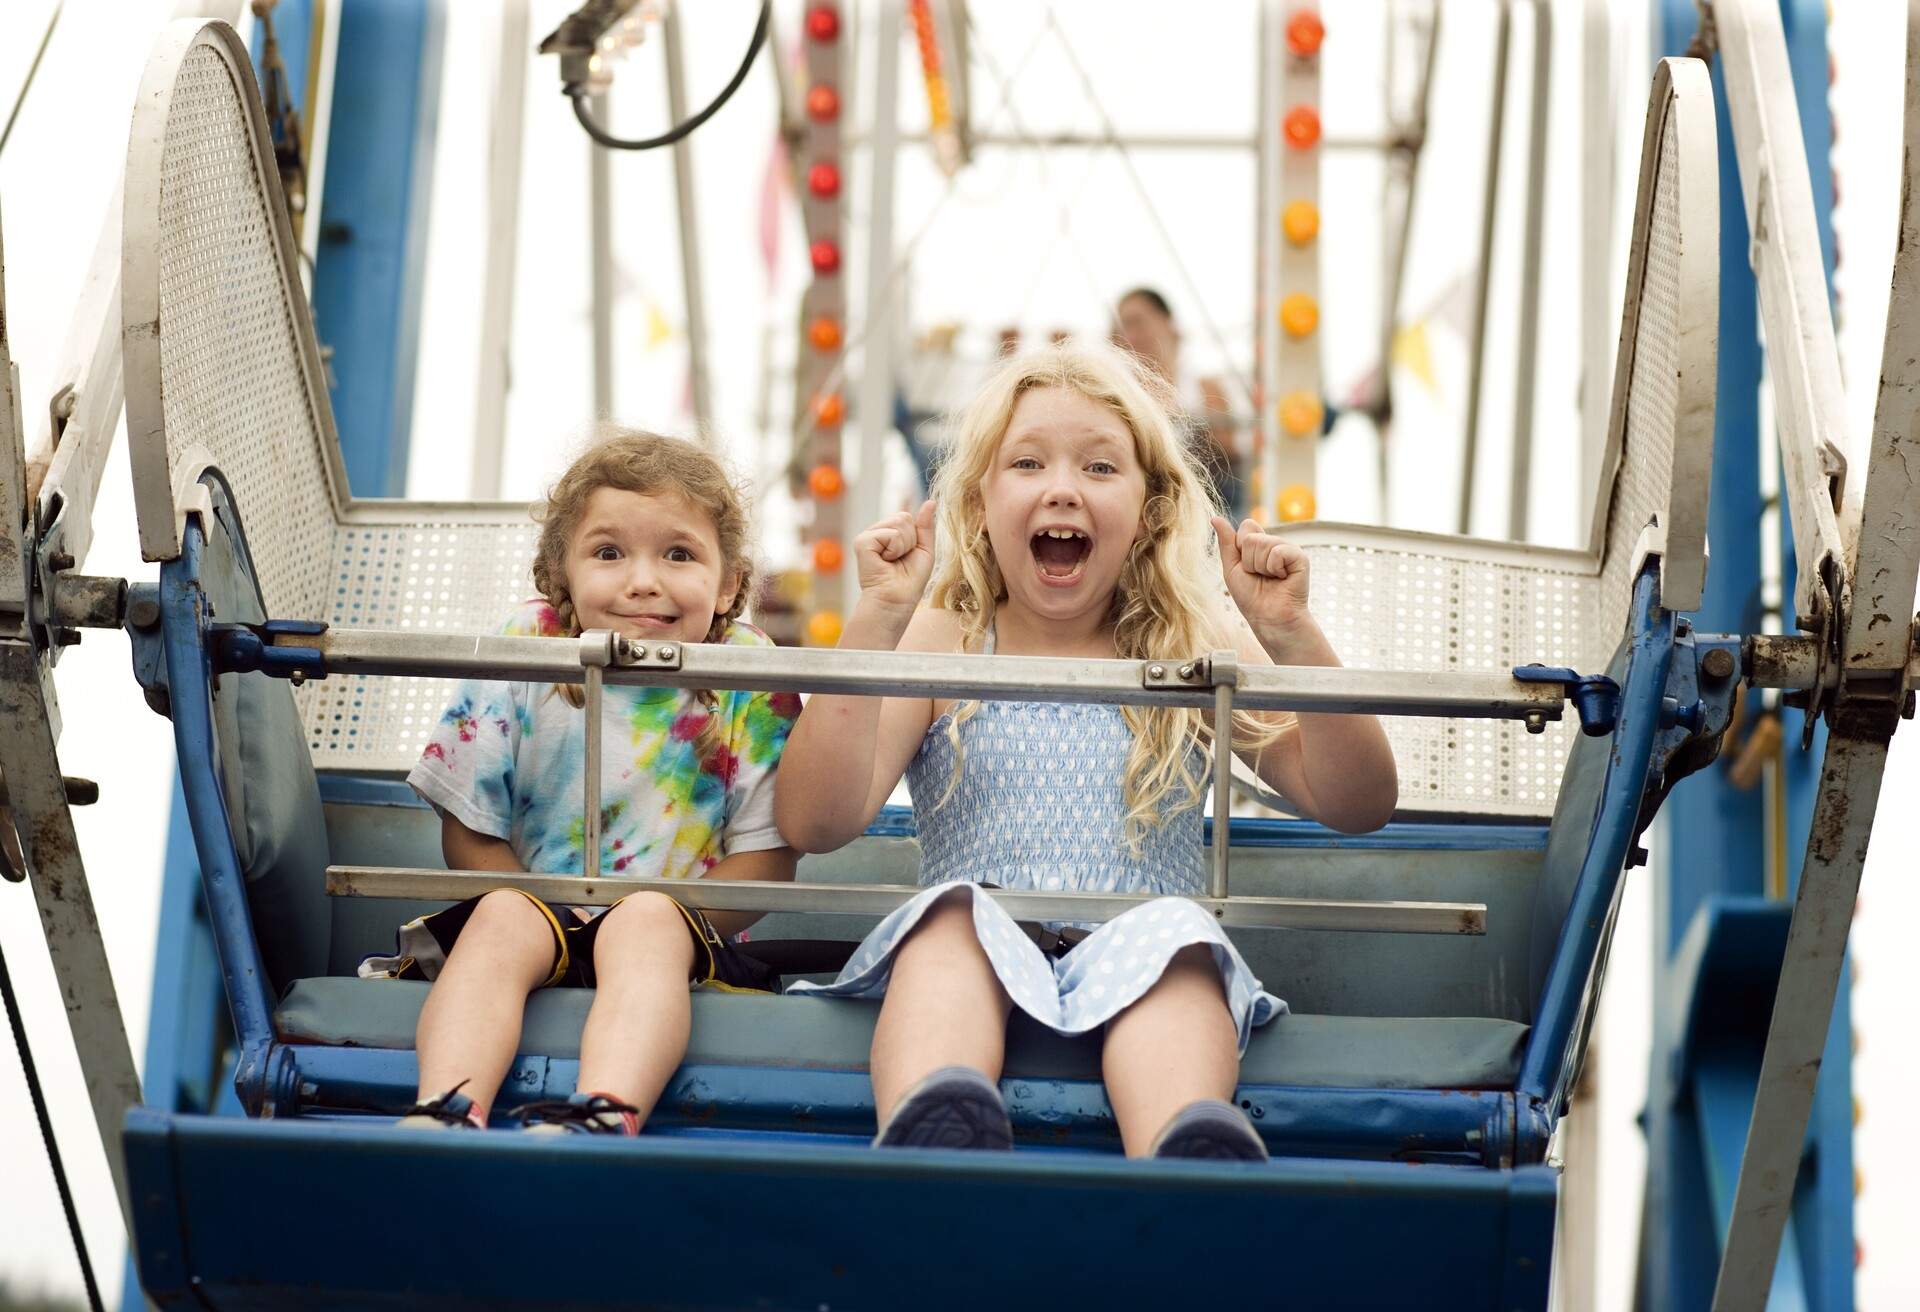 theme_people_children_sisters_amusement-park_ferris-wheel-gettyimages-80119422_universal_within-usage-period_83349